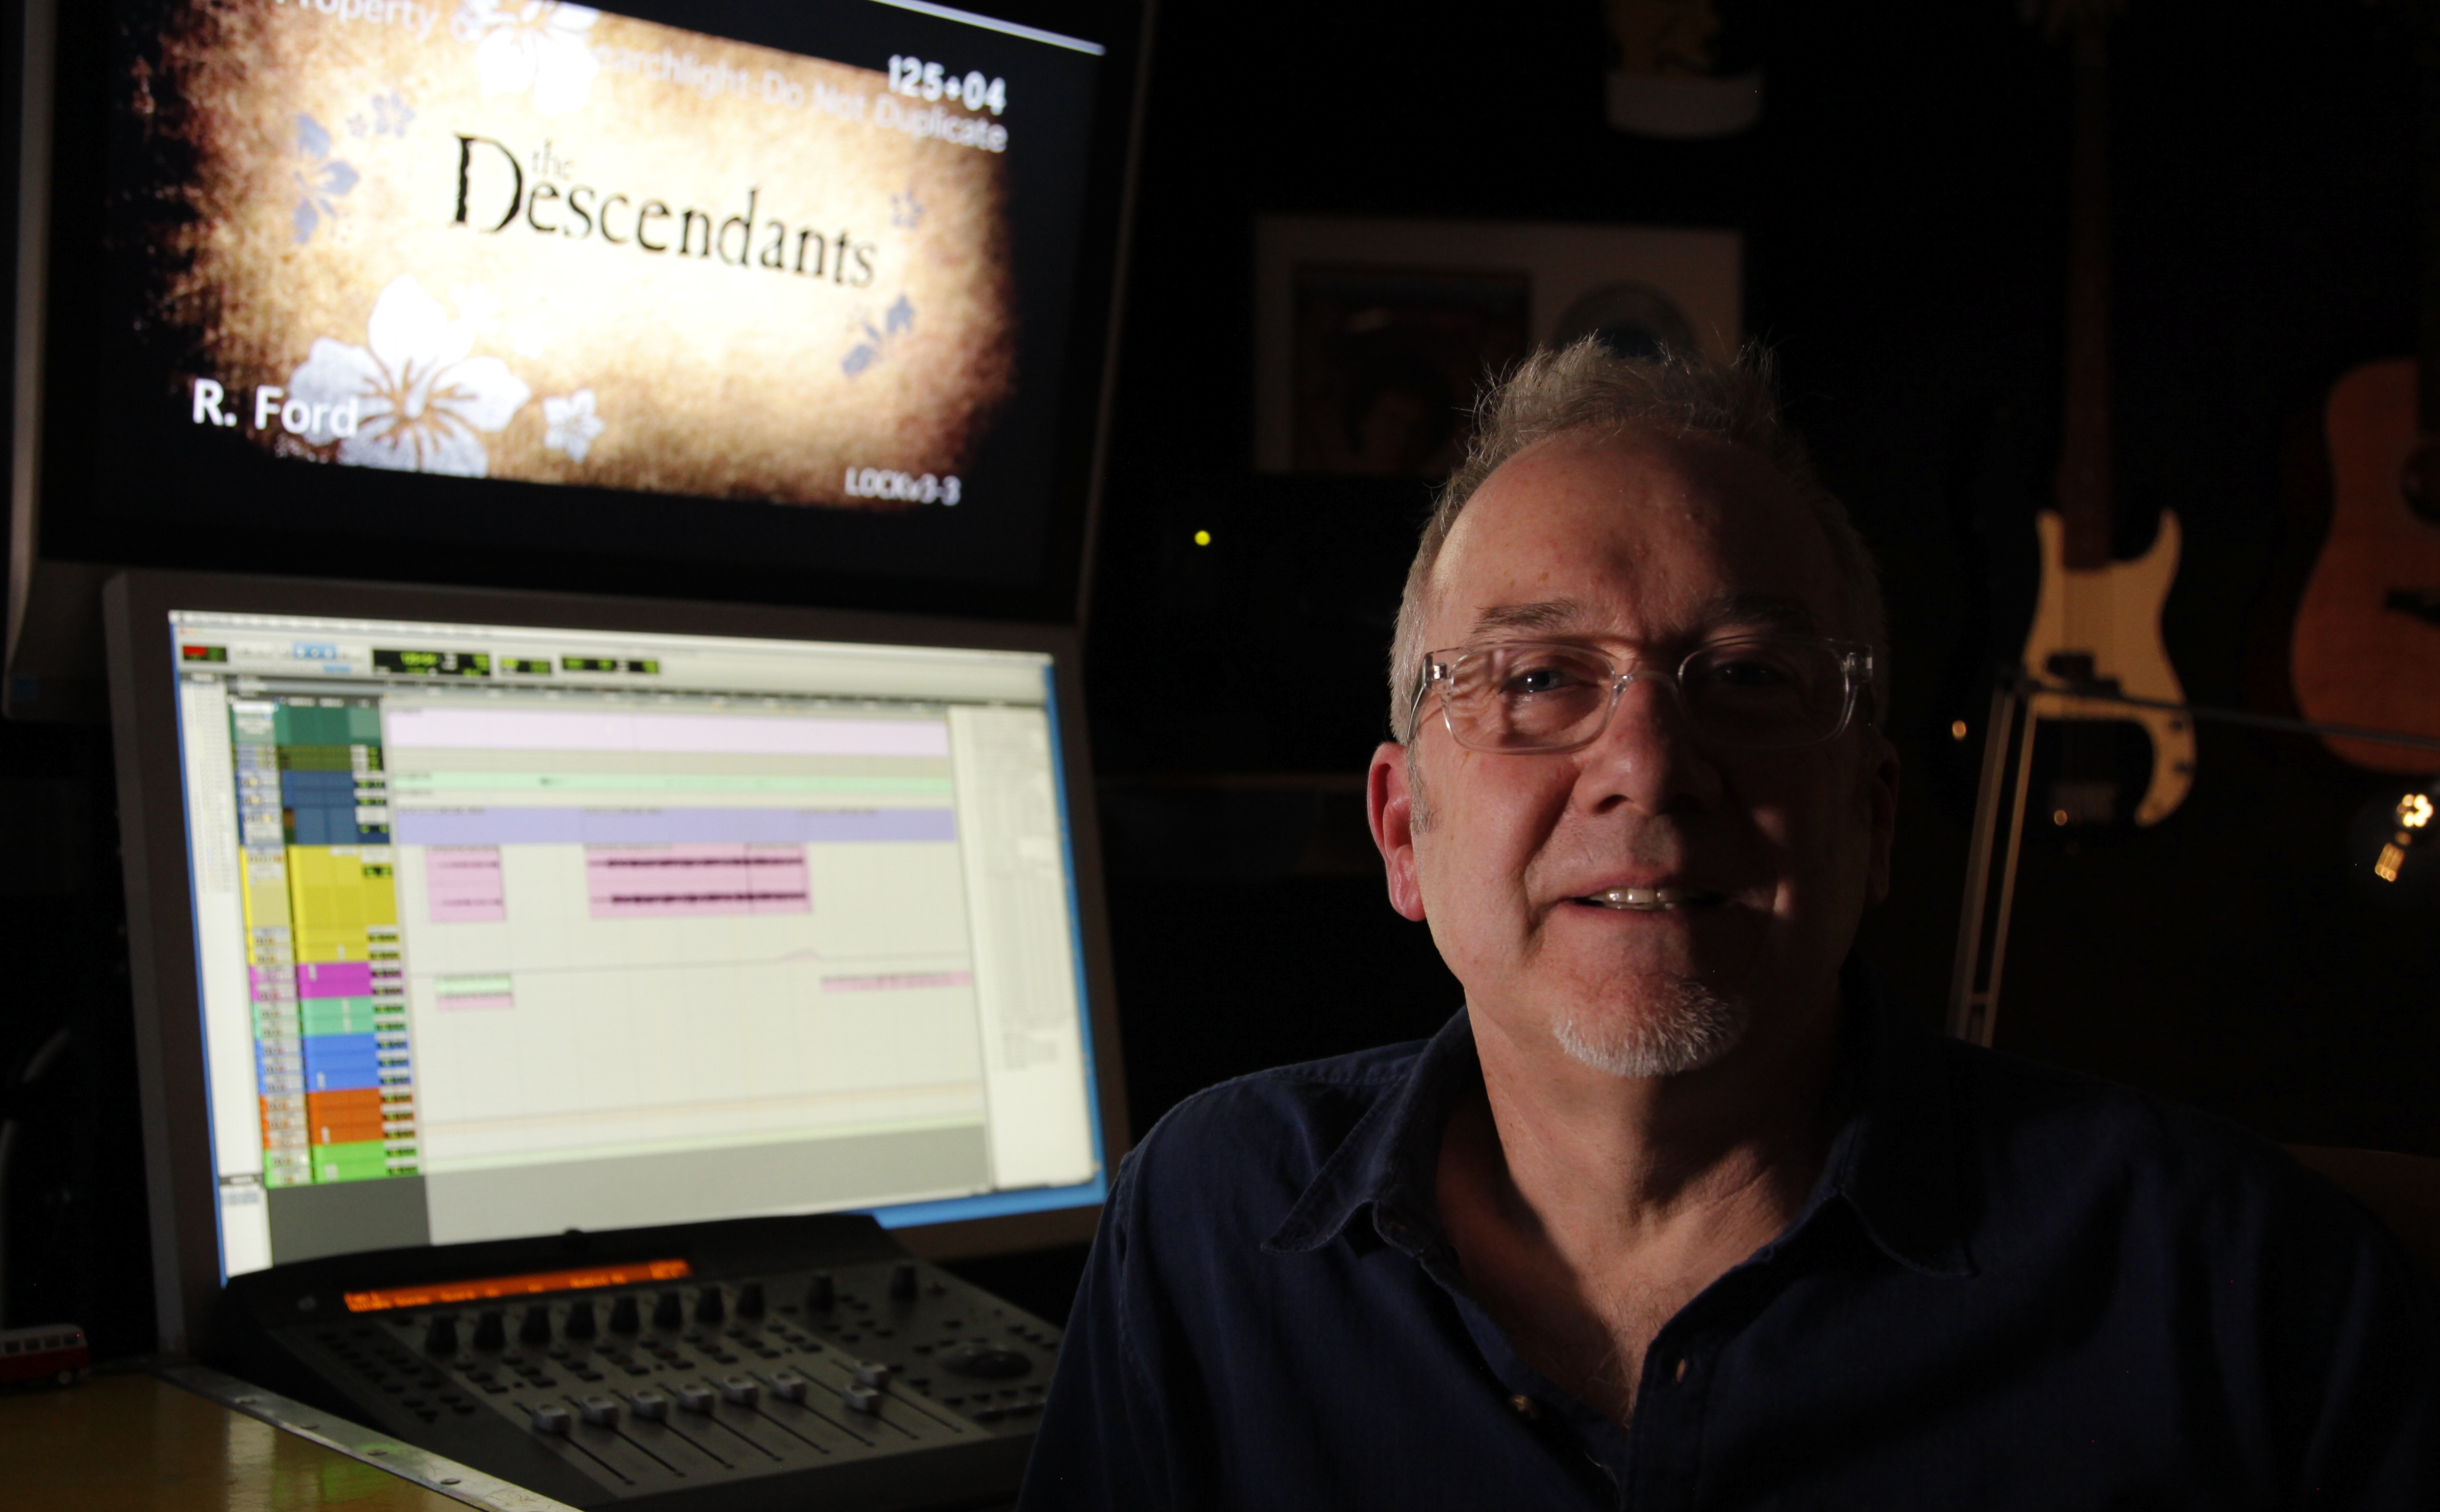 for interview with Mark Governor about the music in The Descendants. Video by Jesse Gift http://vimeo.com/32996996